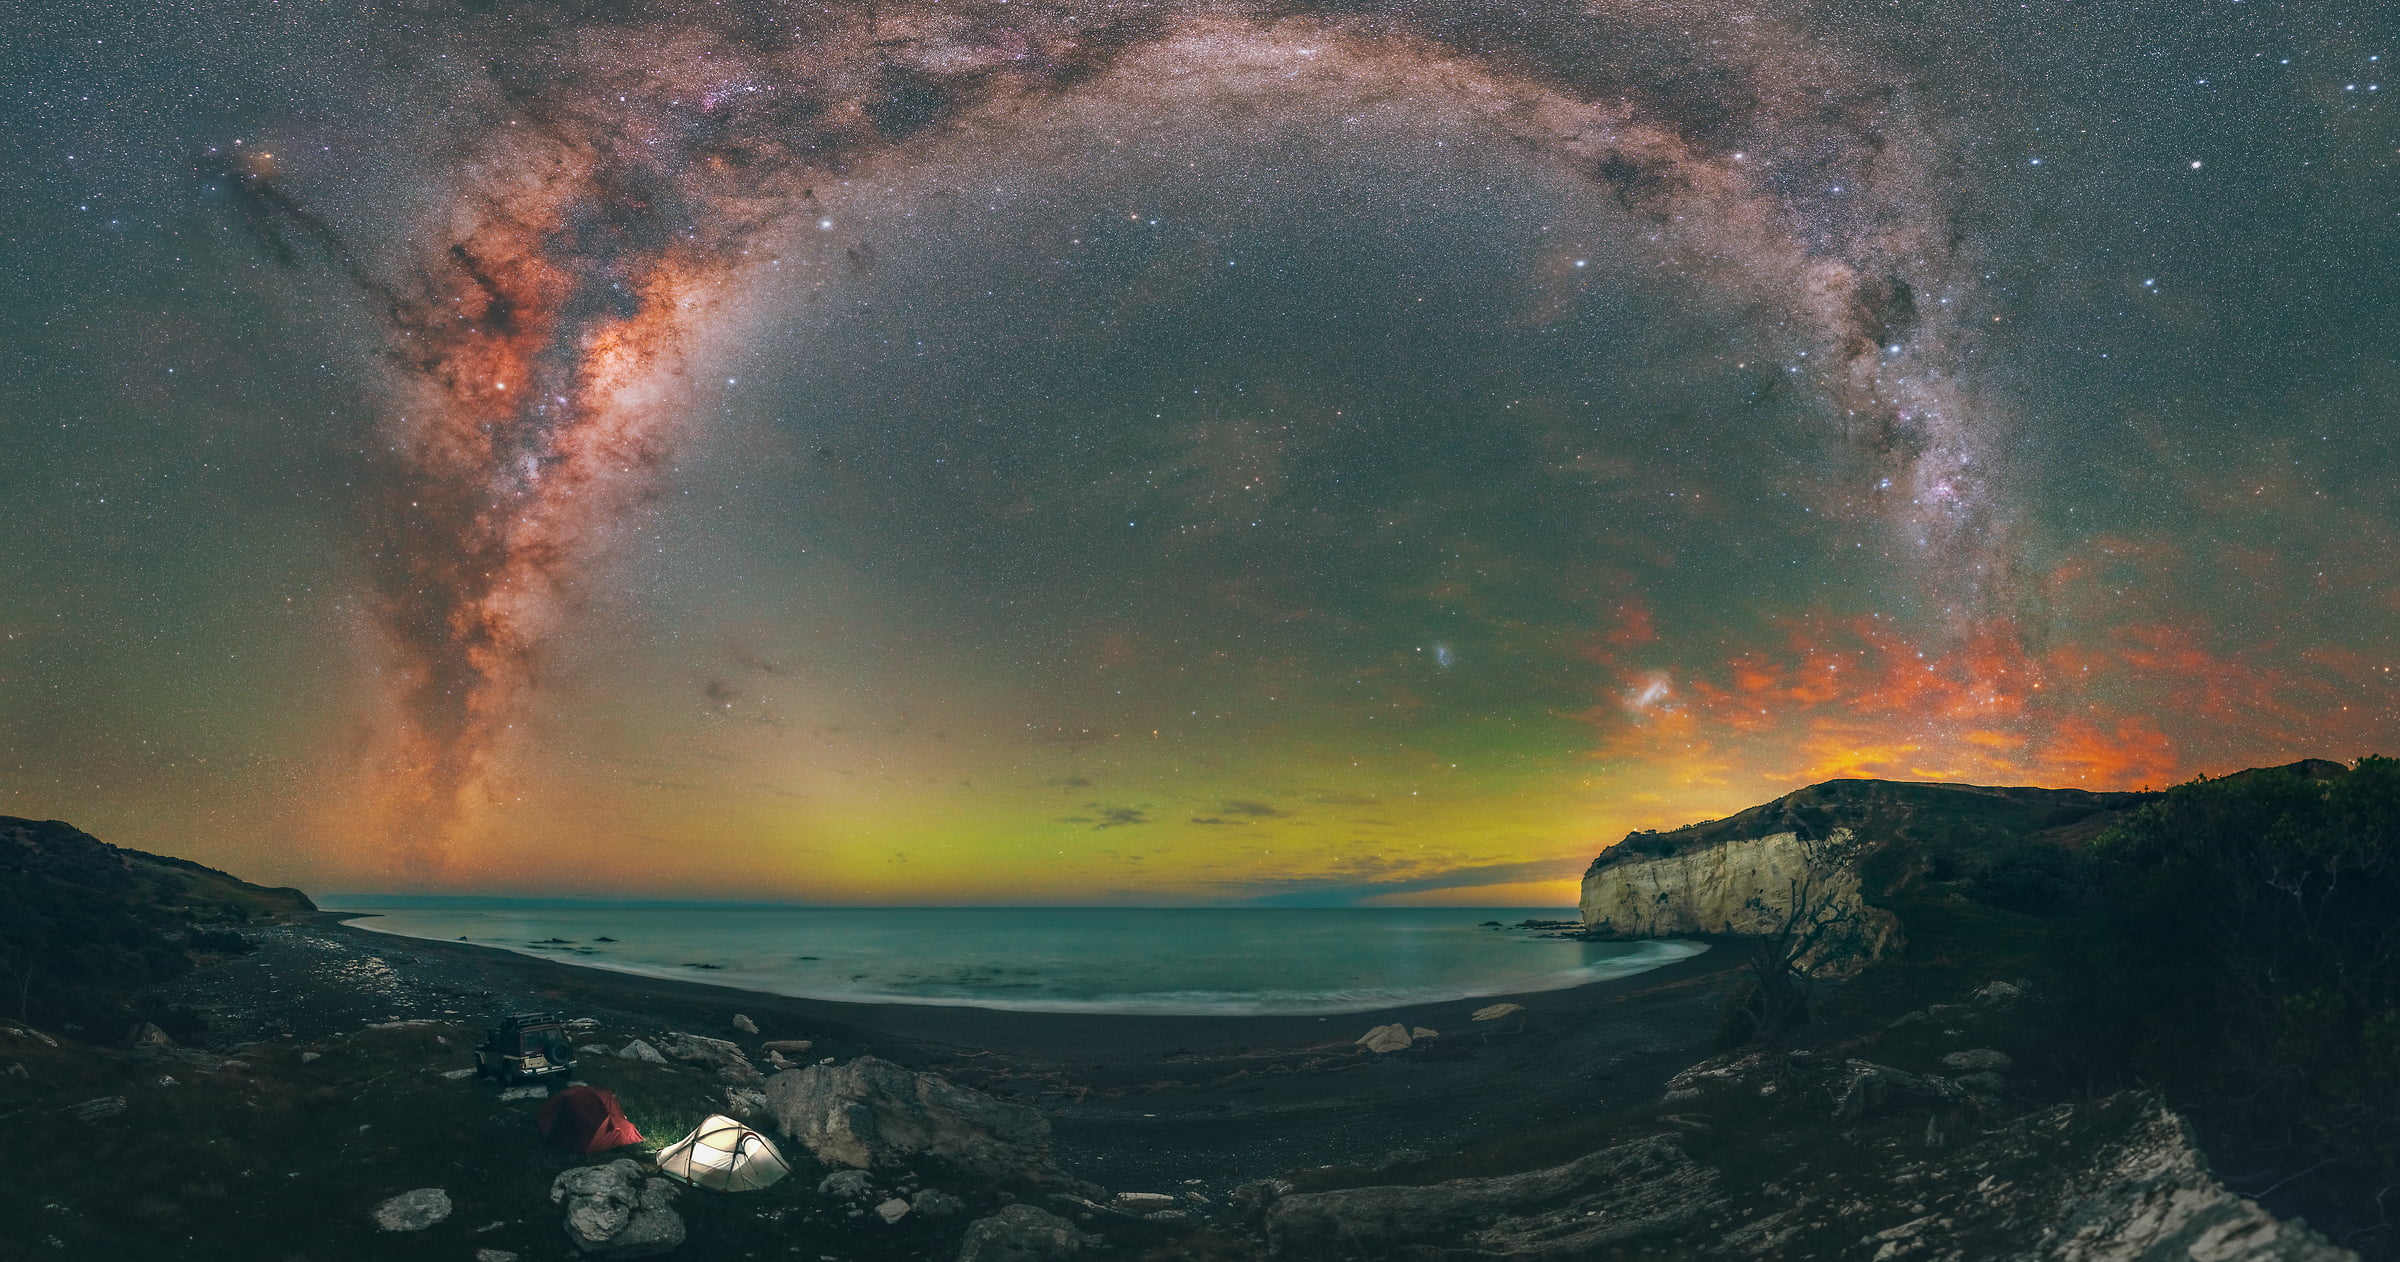 691 megapixels! A very high resolution, large-format VAST photo print of the night sky, milky way, and stars over an ocean beach with tents and camping equipment; fine art astrophotography landscape photo created by Paul Wilson in New Zealand.